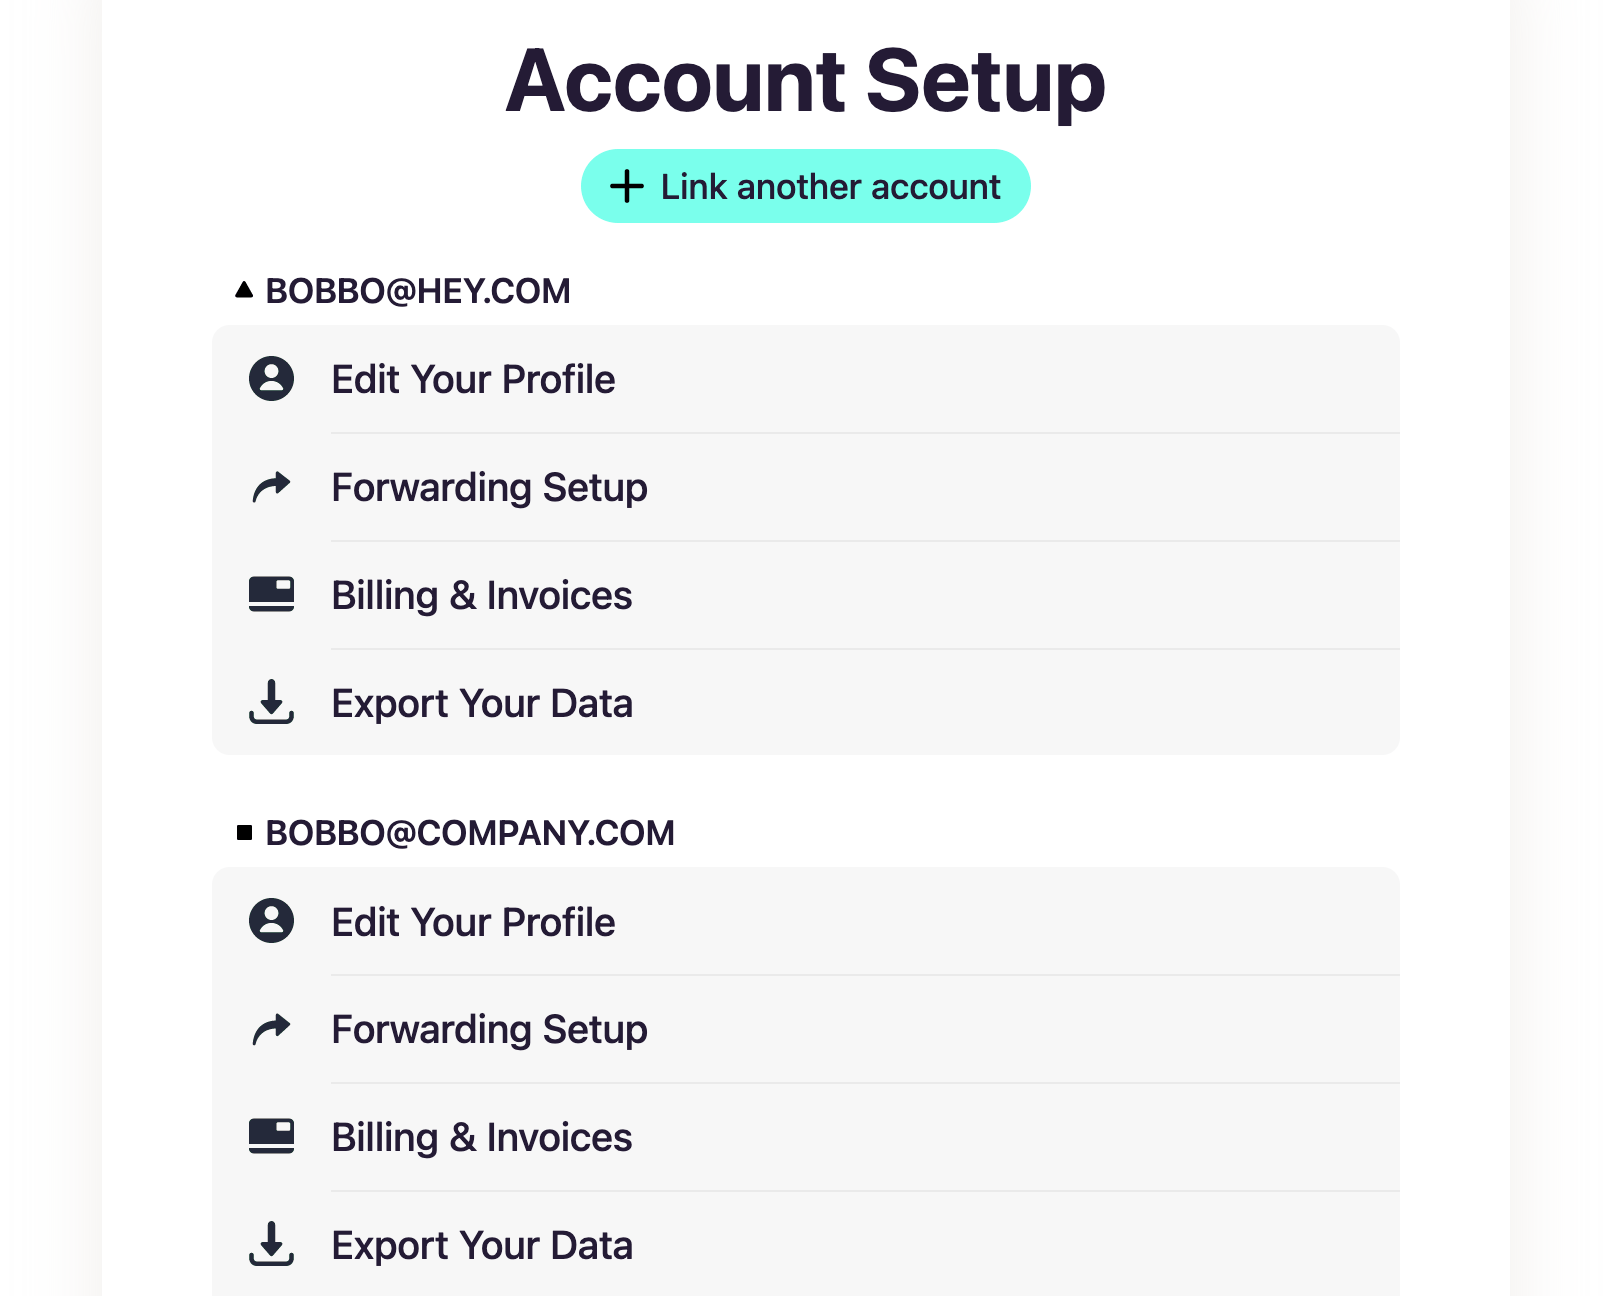 Account Setup in linked mode